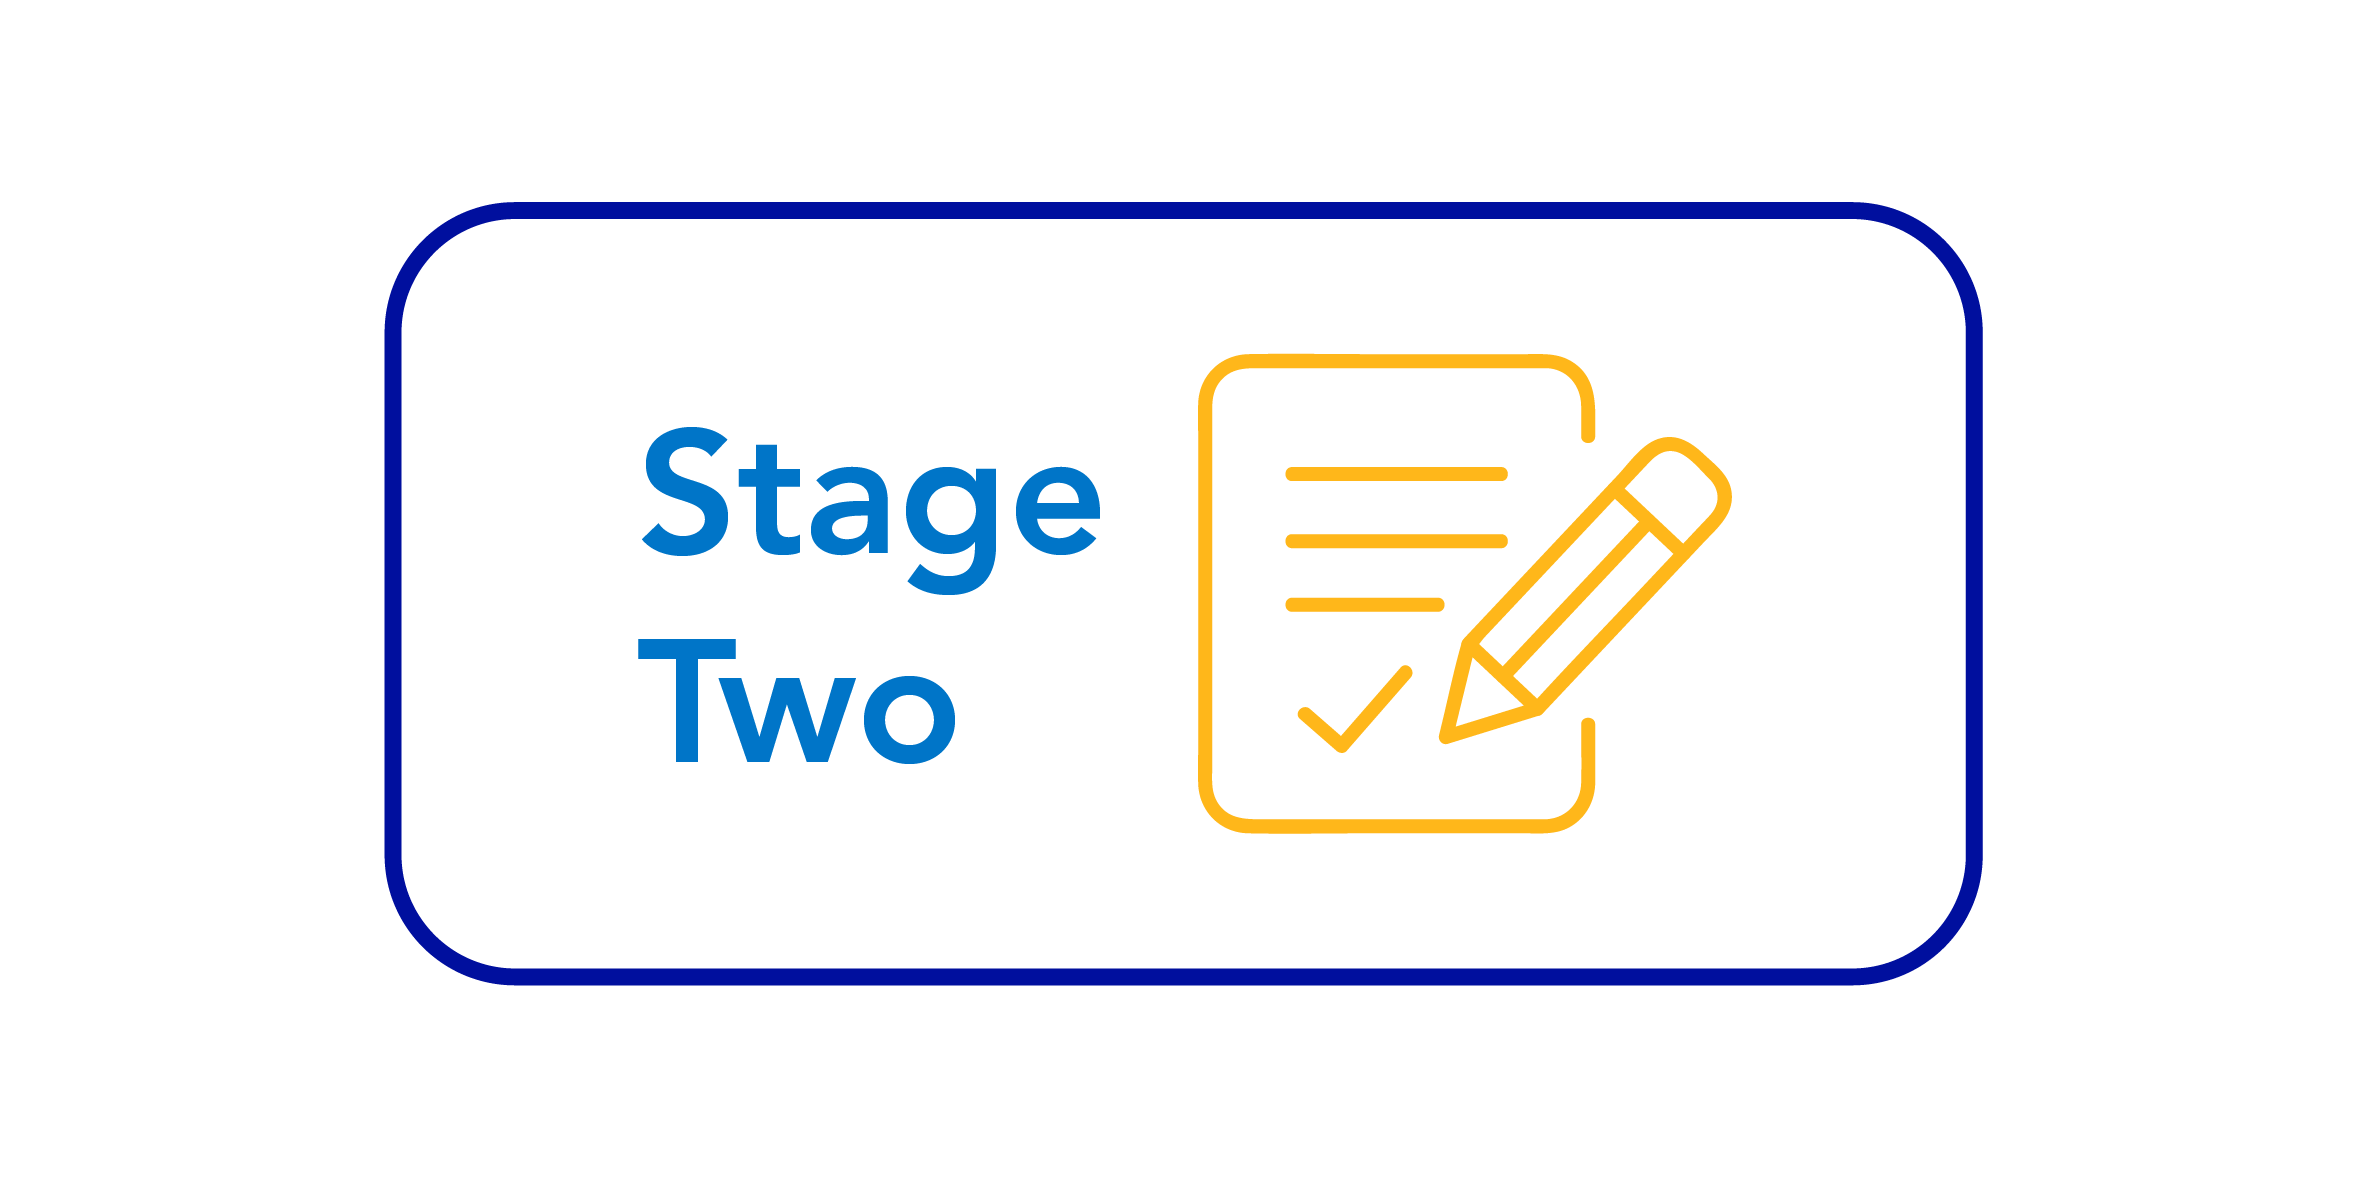 stage two - your full design and business case